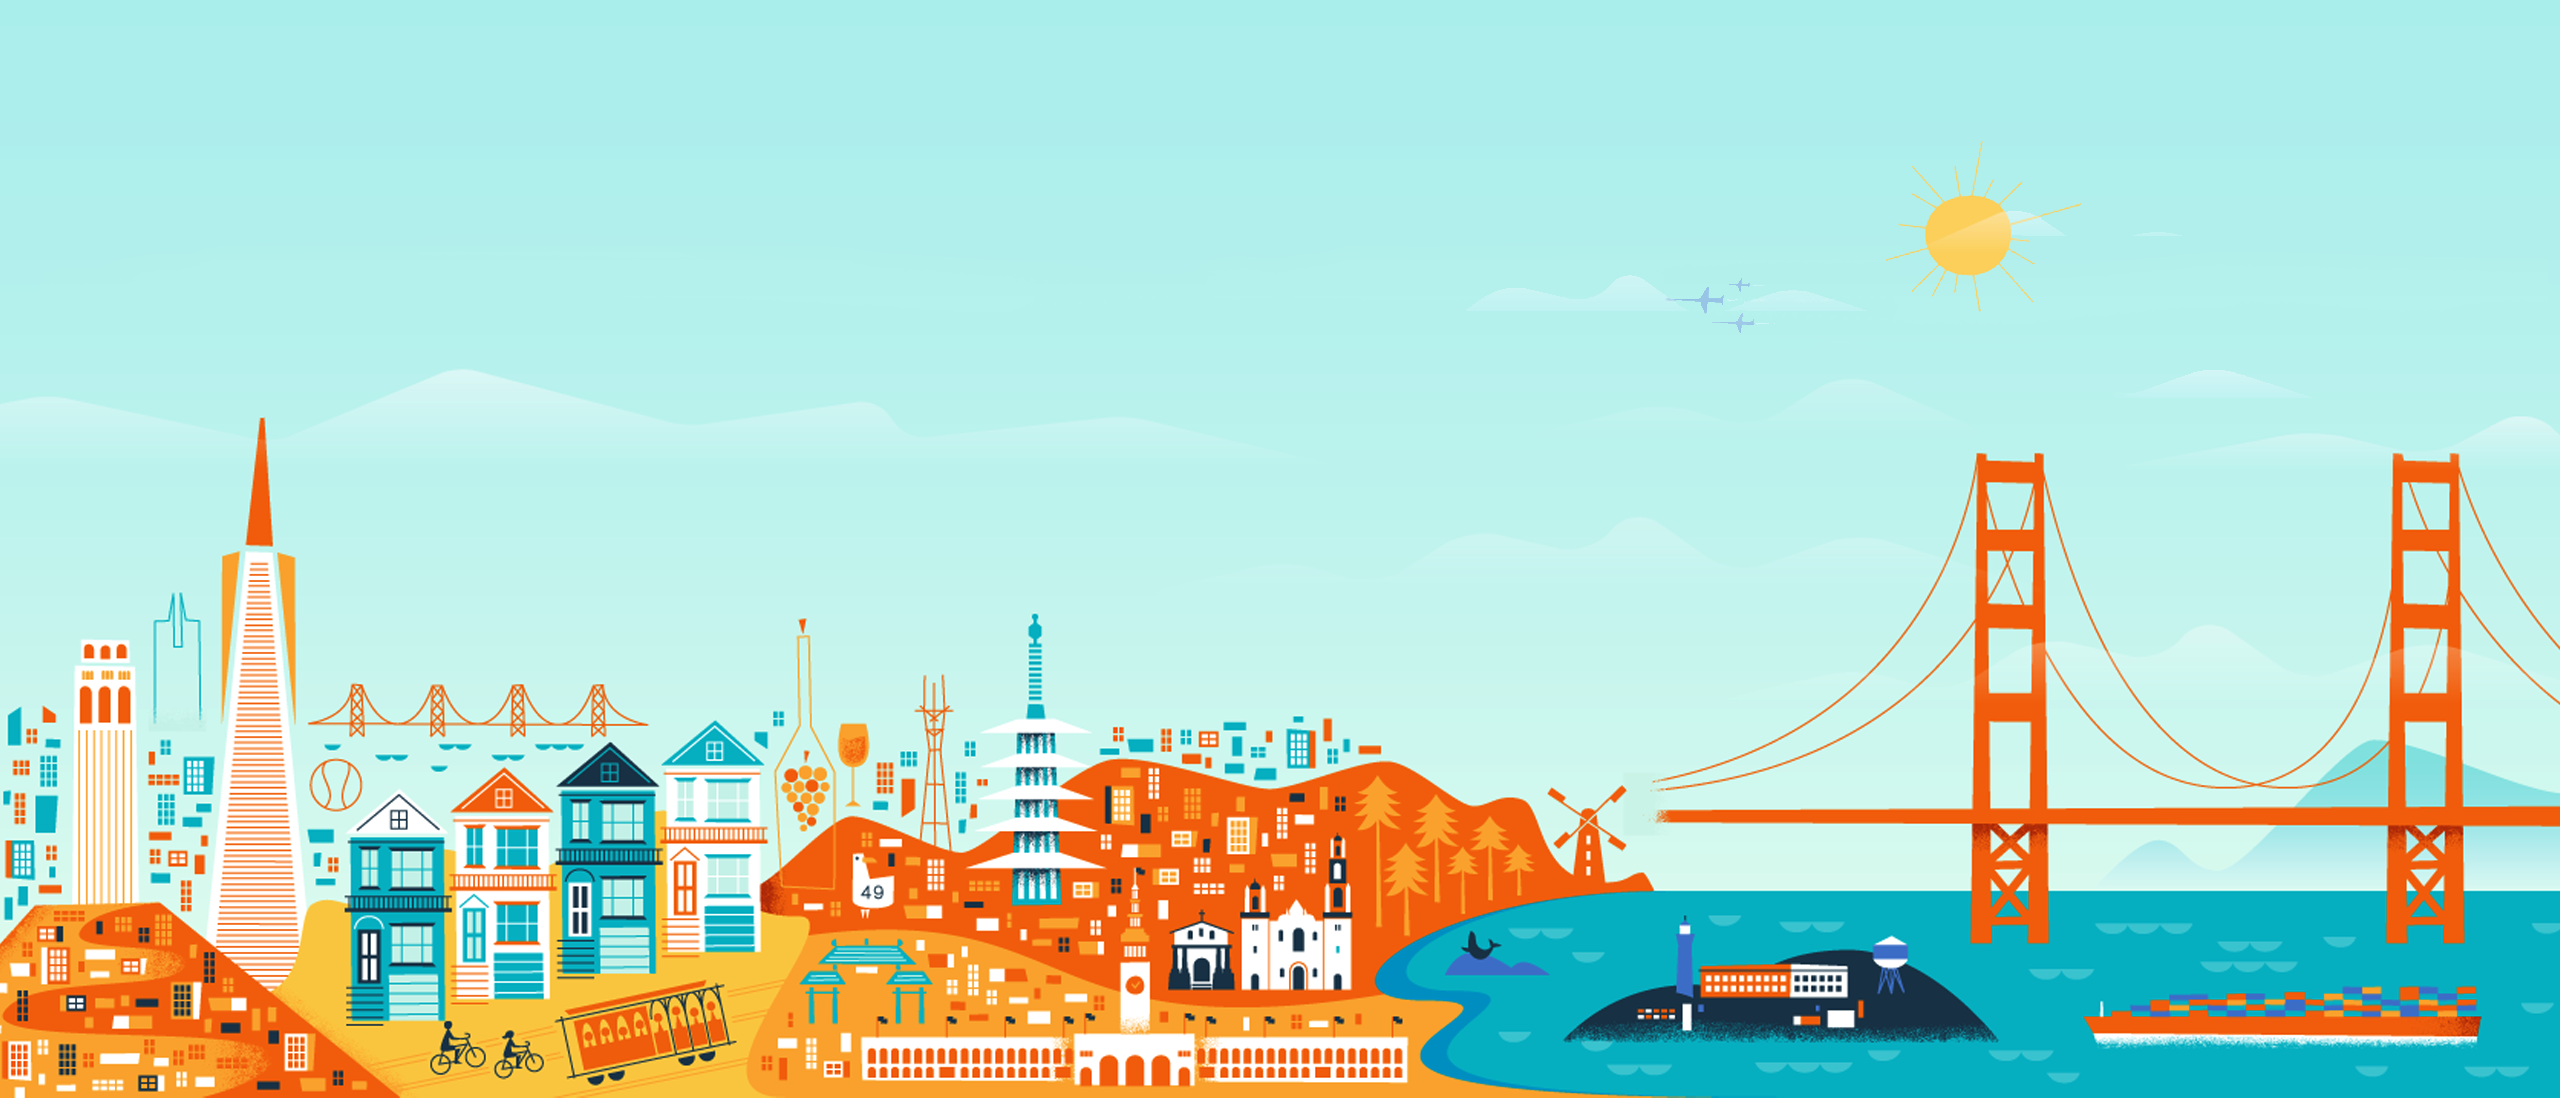 Images] 44 Google Now Backgrounds Available In High - Google Now San Francisco - HD Wallpaper 